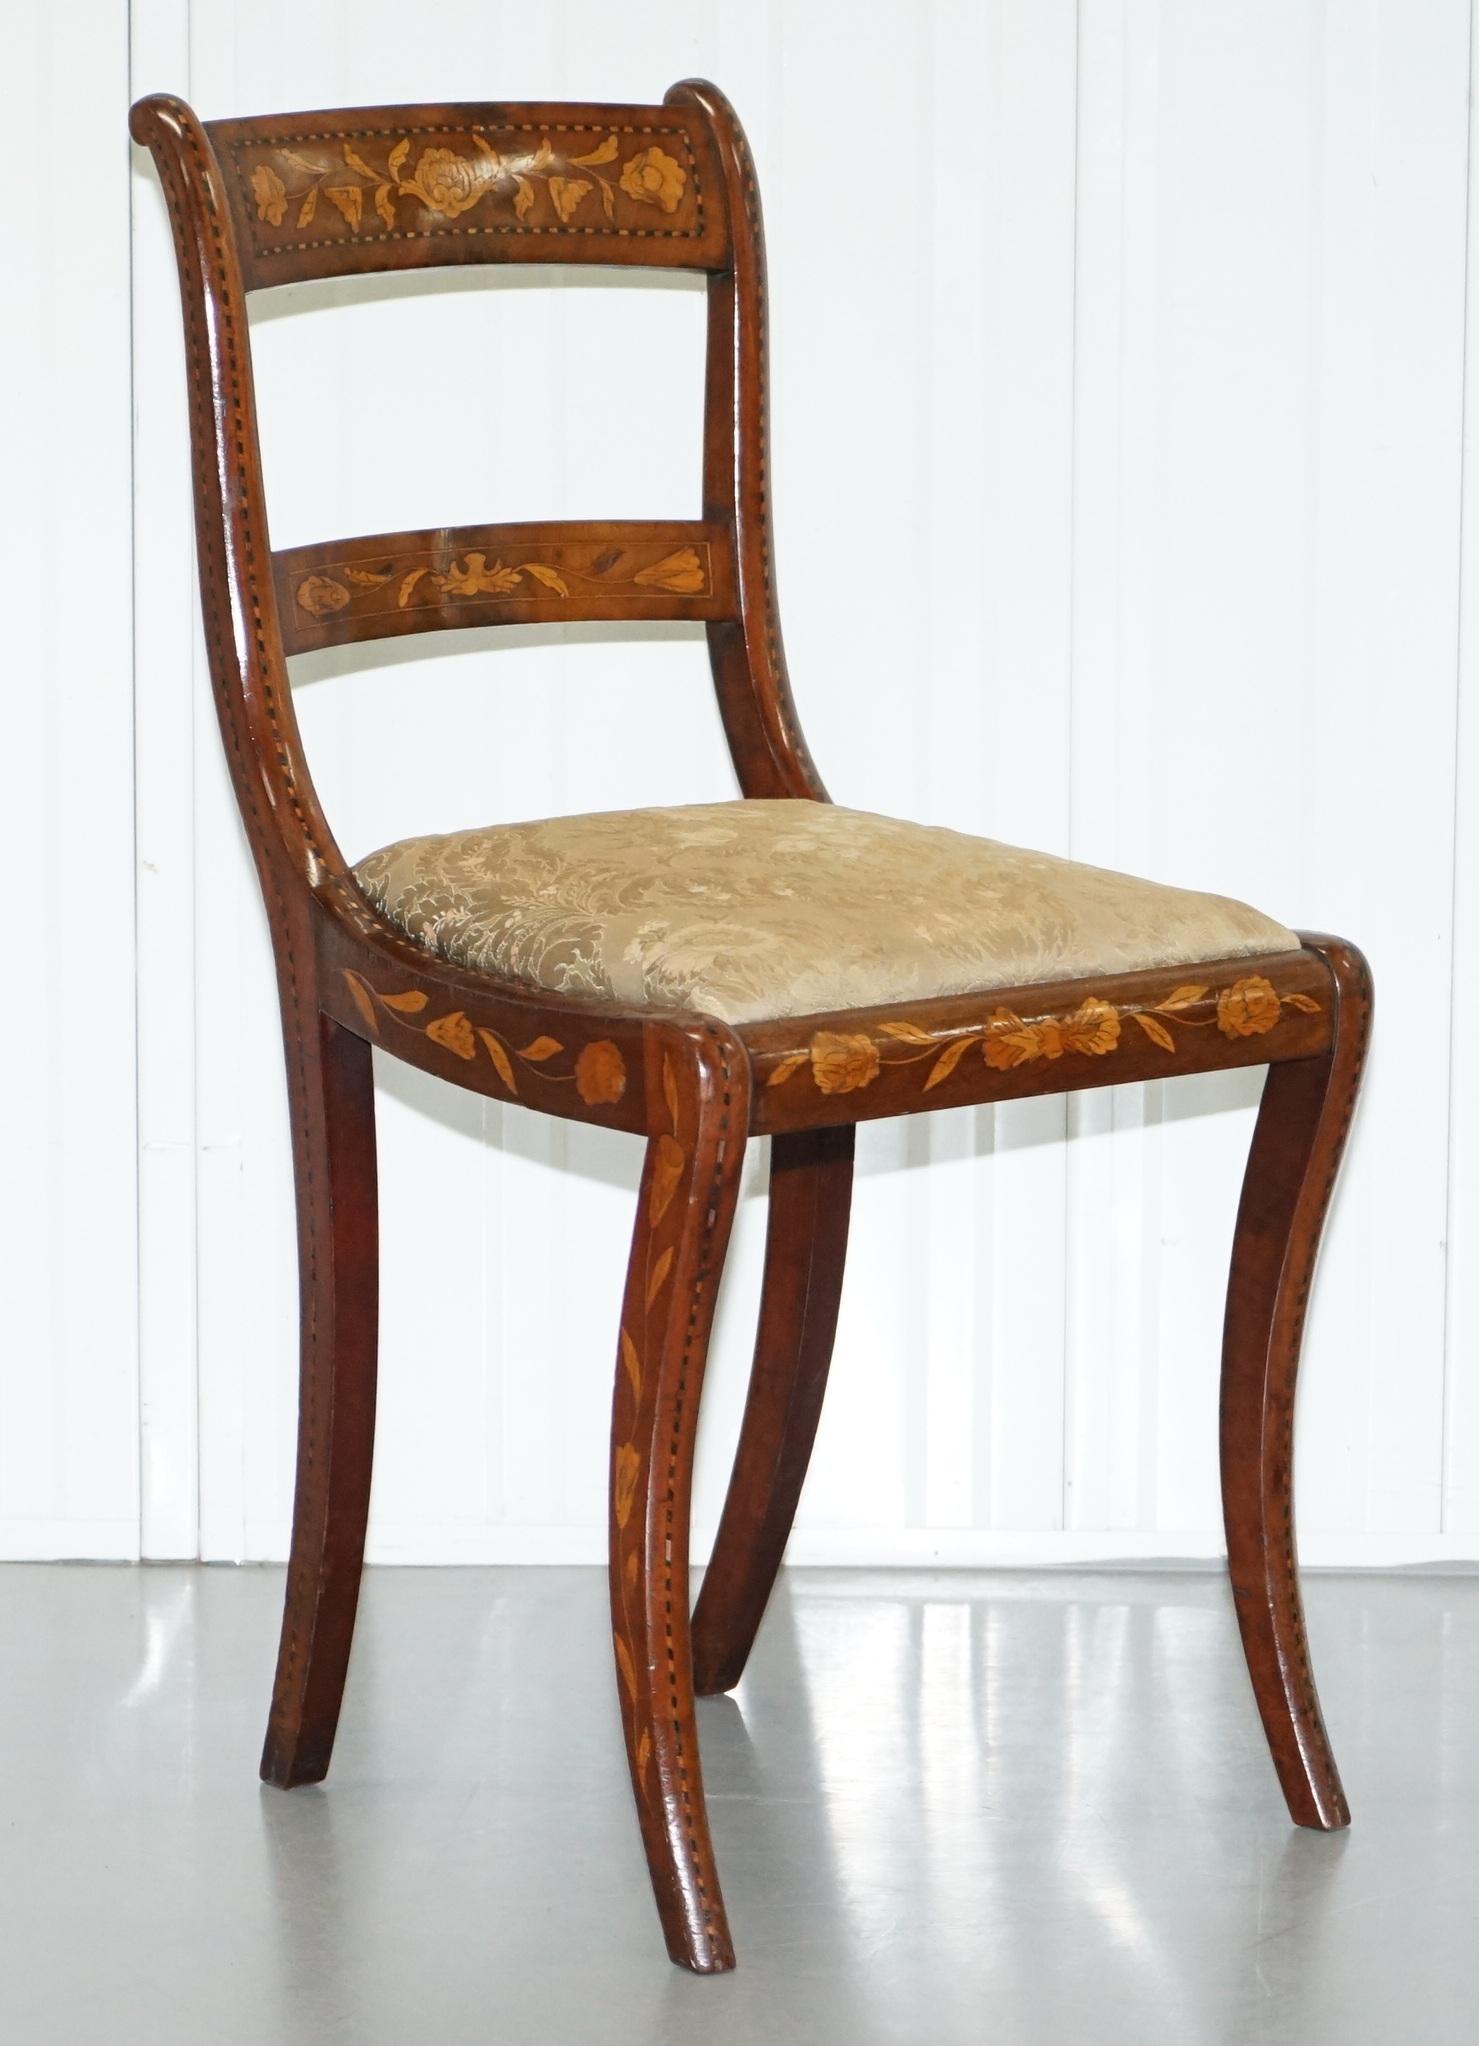 We are delighted to offer for sale this stunning pair of Regency satinwood Dutch marquetry inlaid side chairs

Very good looking and well made chairs, Dutch furniture of this type from this era are highly collectable, they almost never come up for